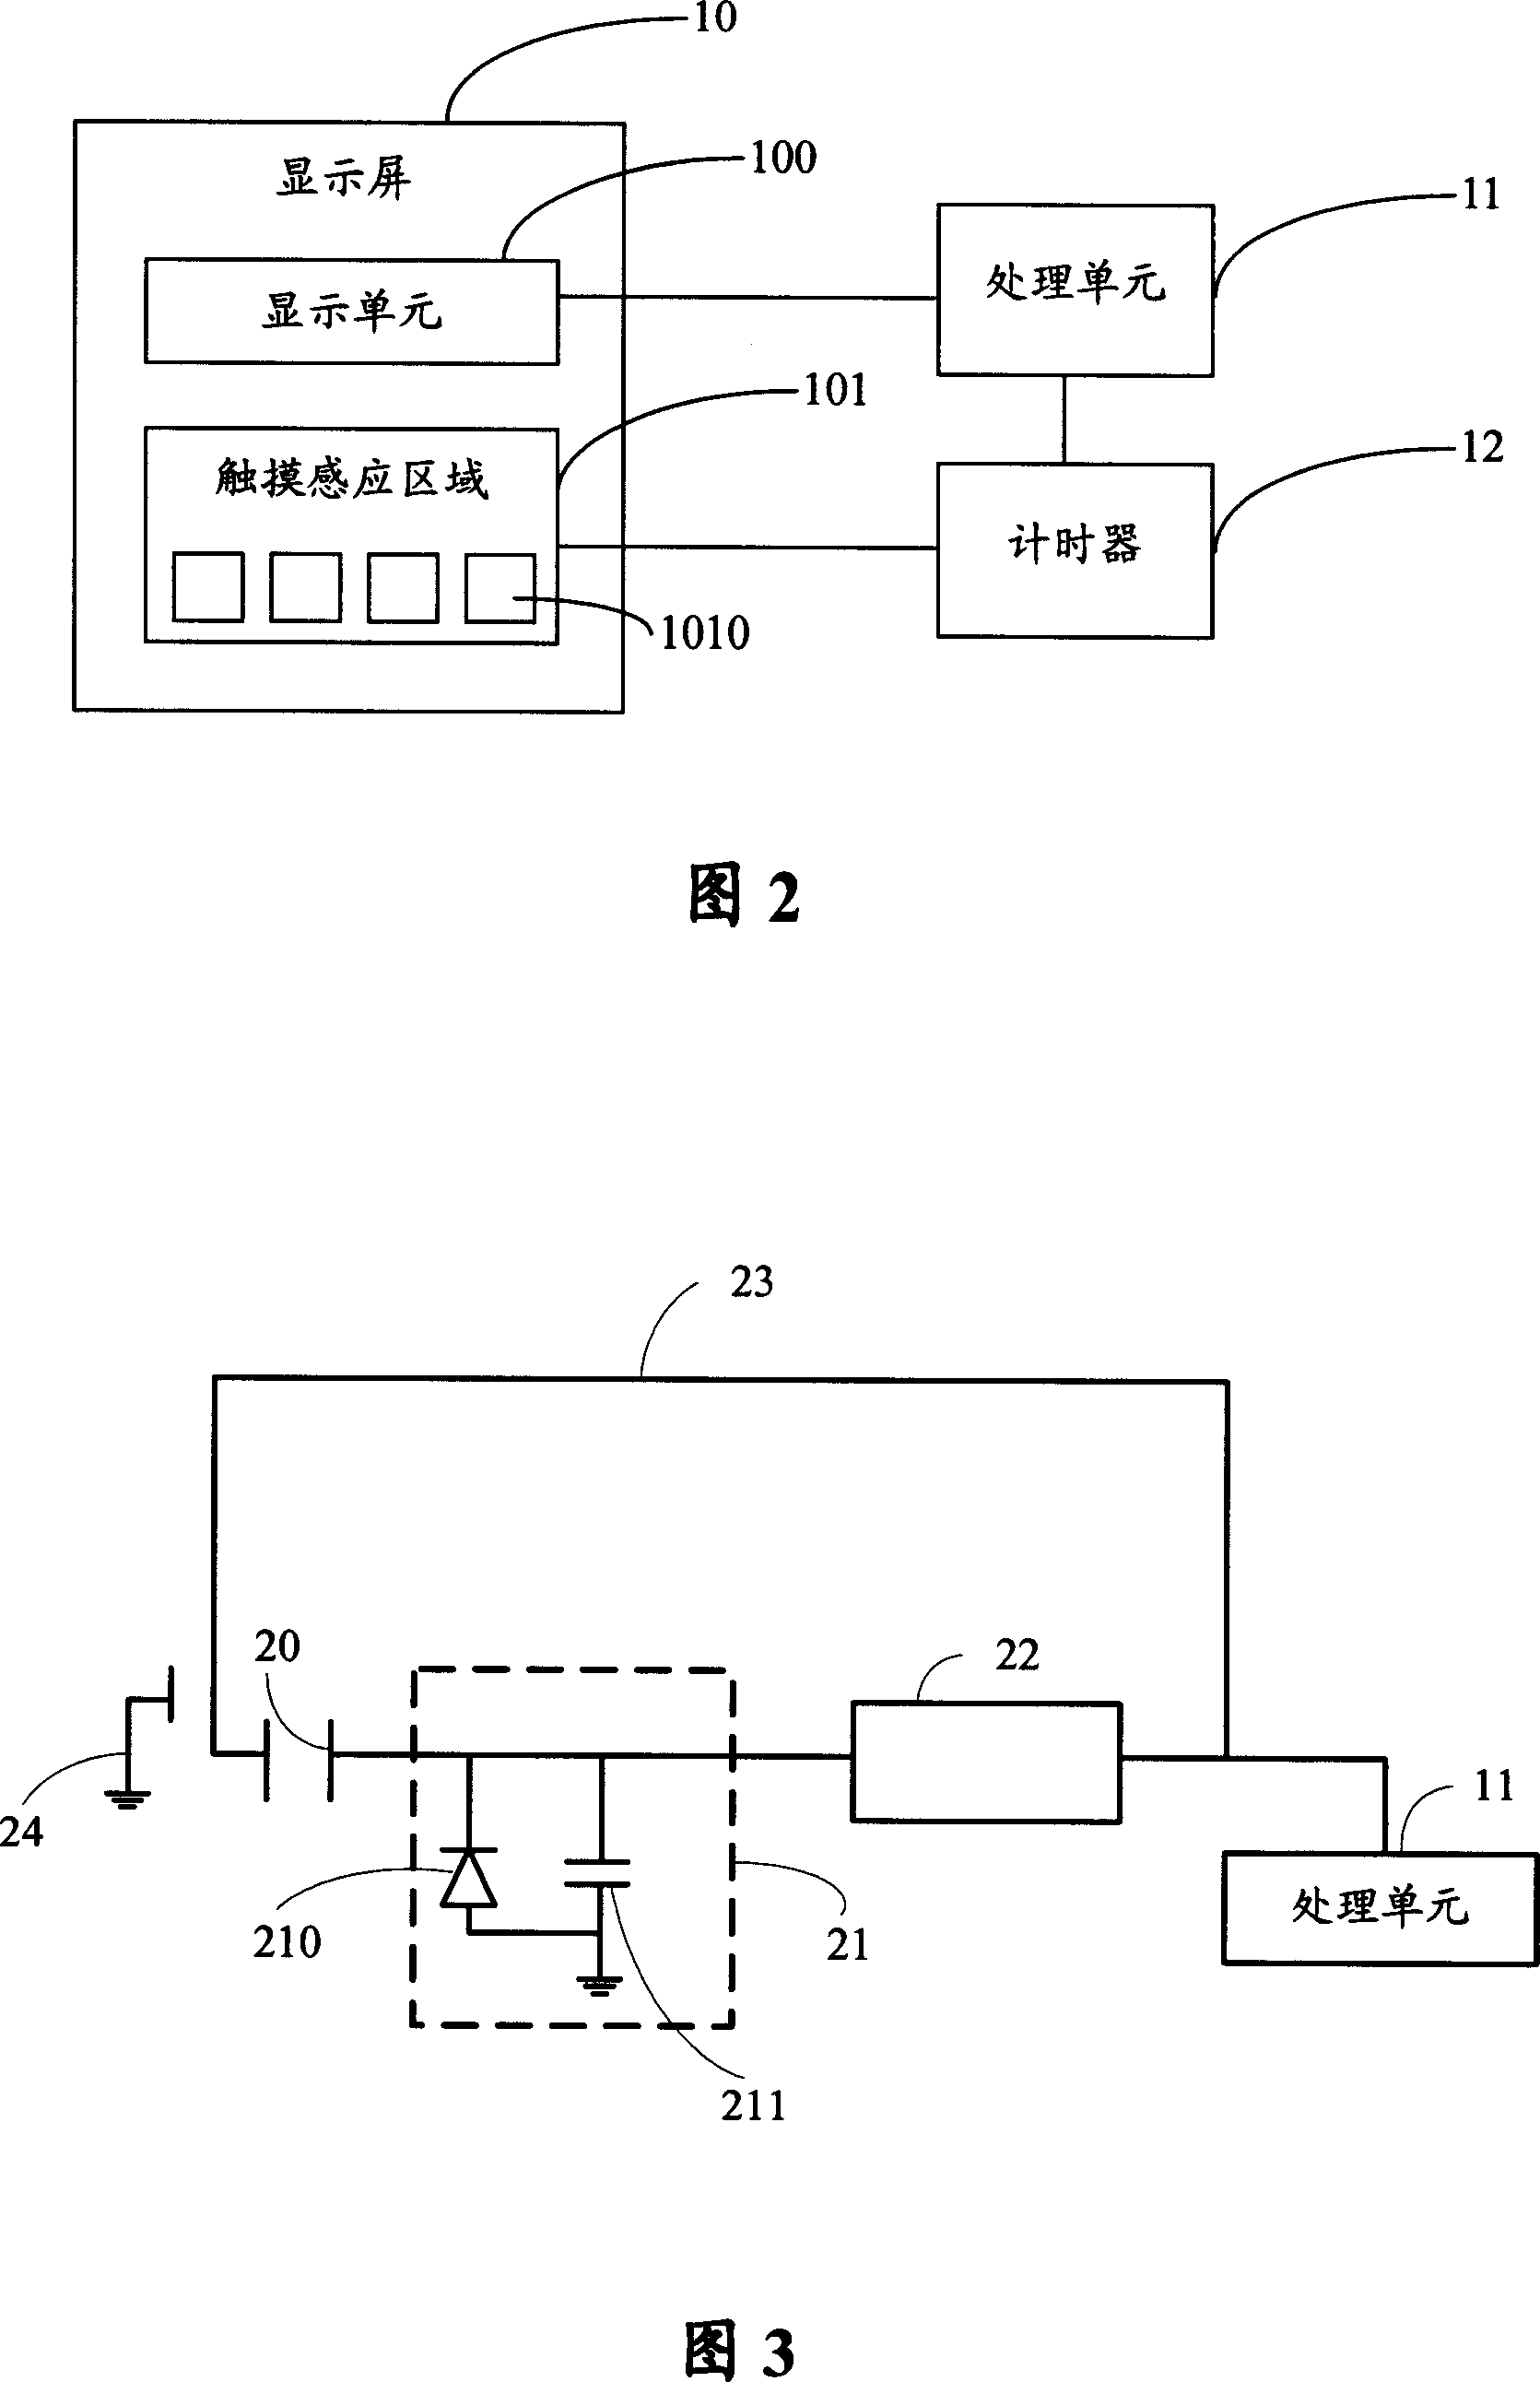 User operation control apparatus and method